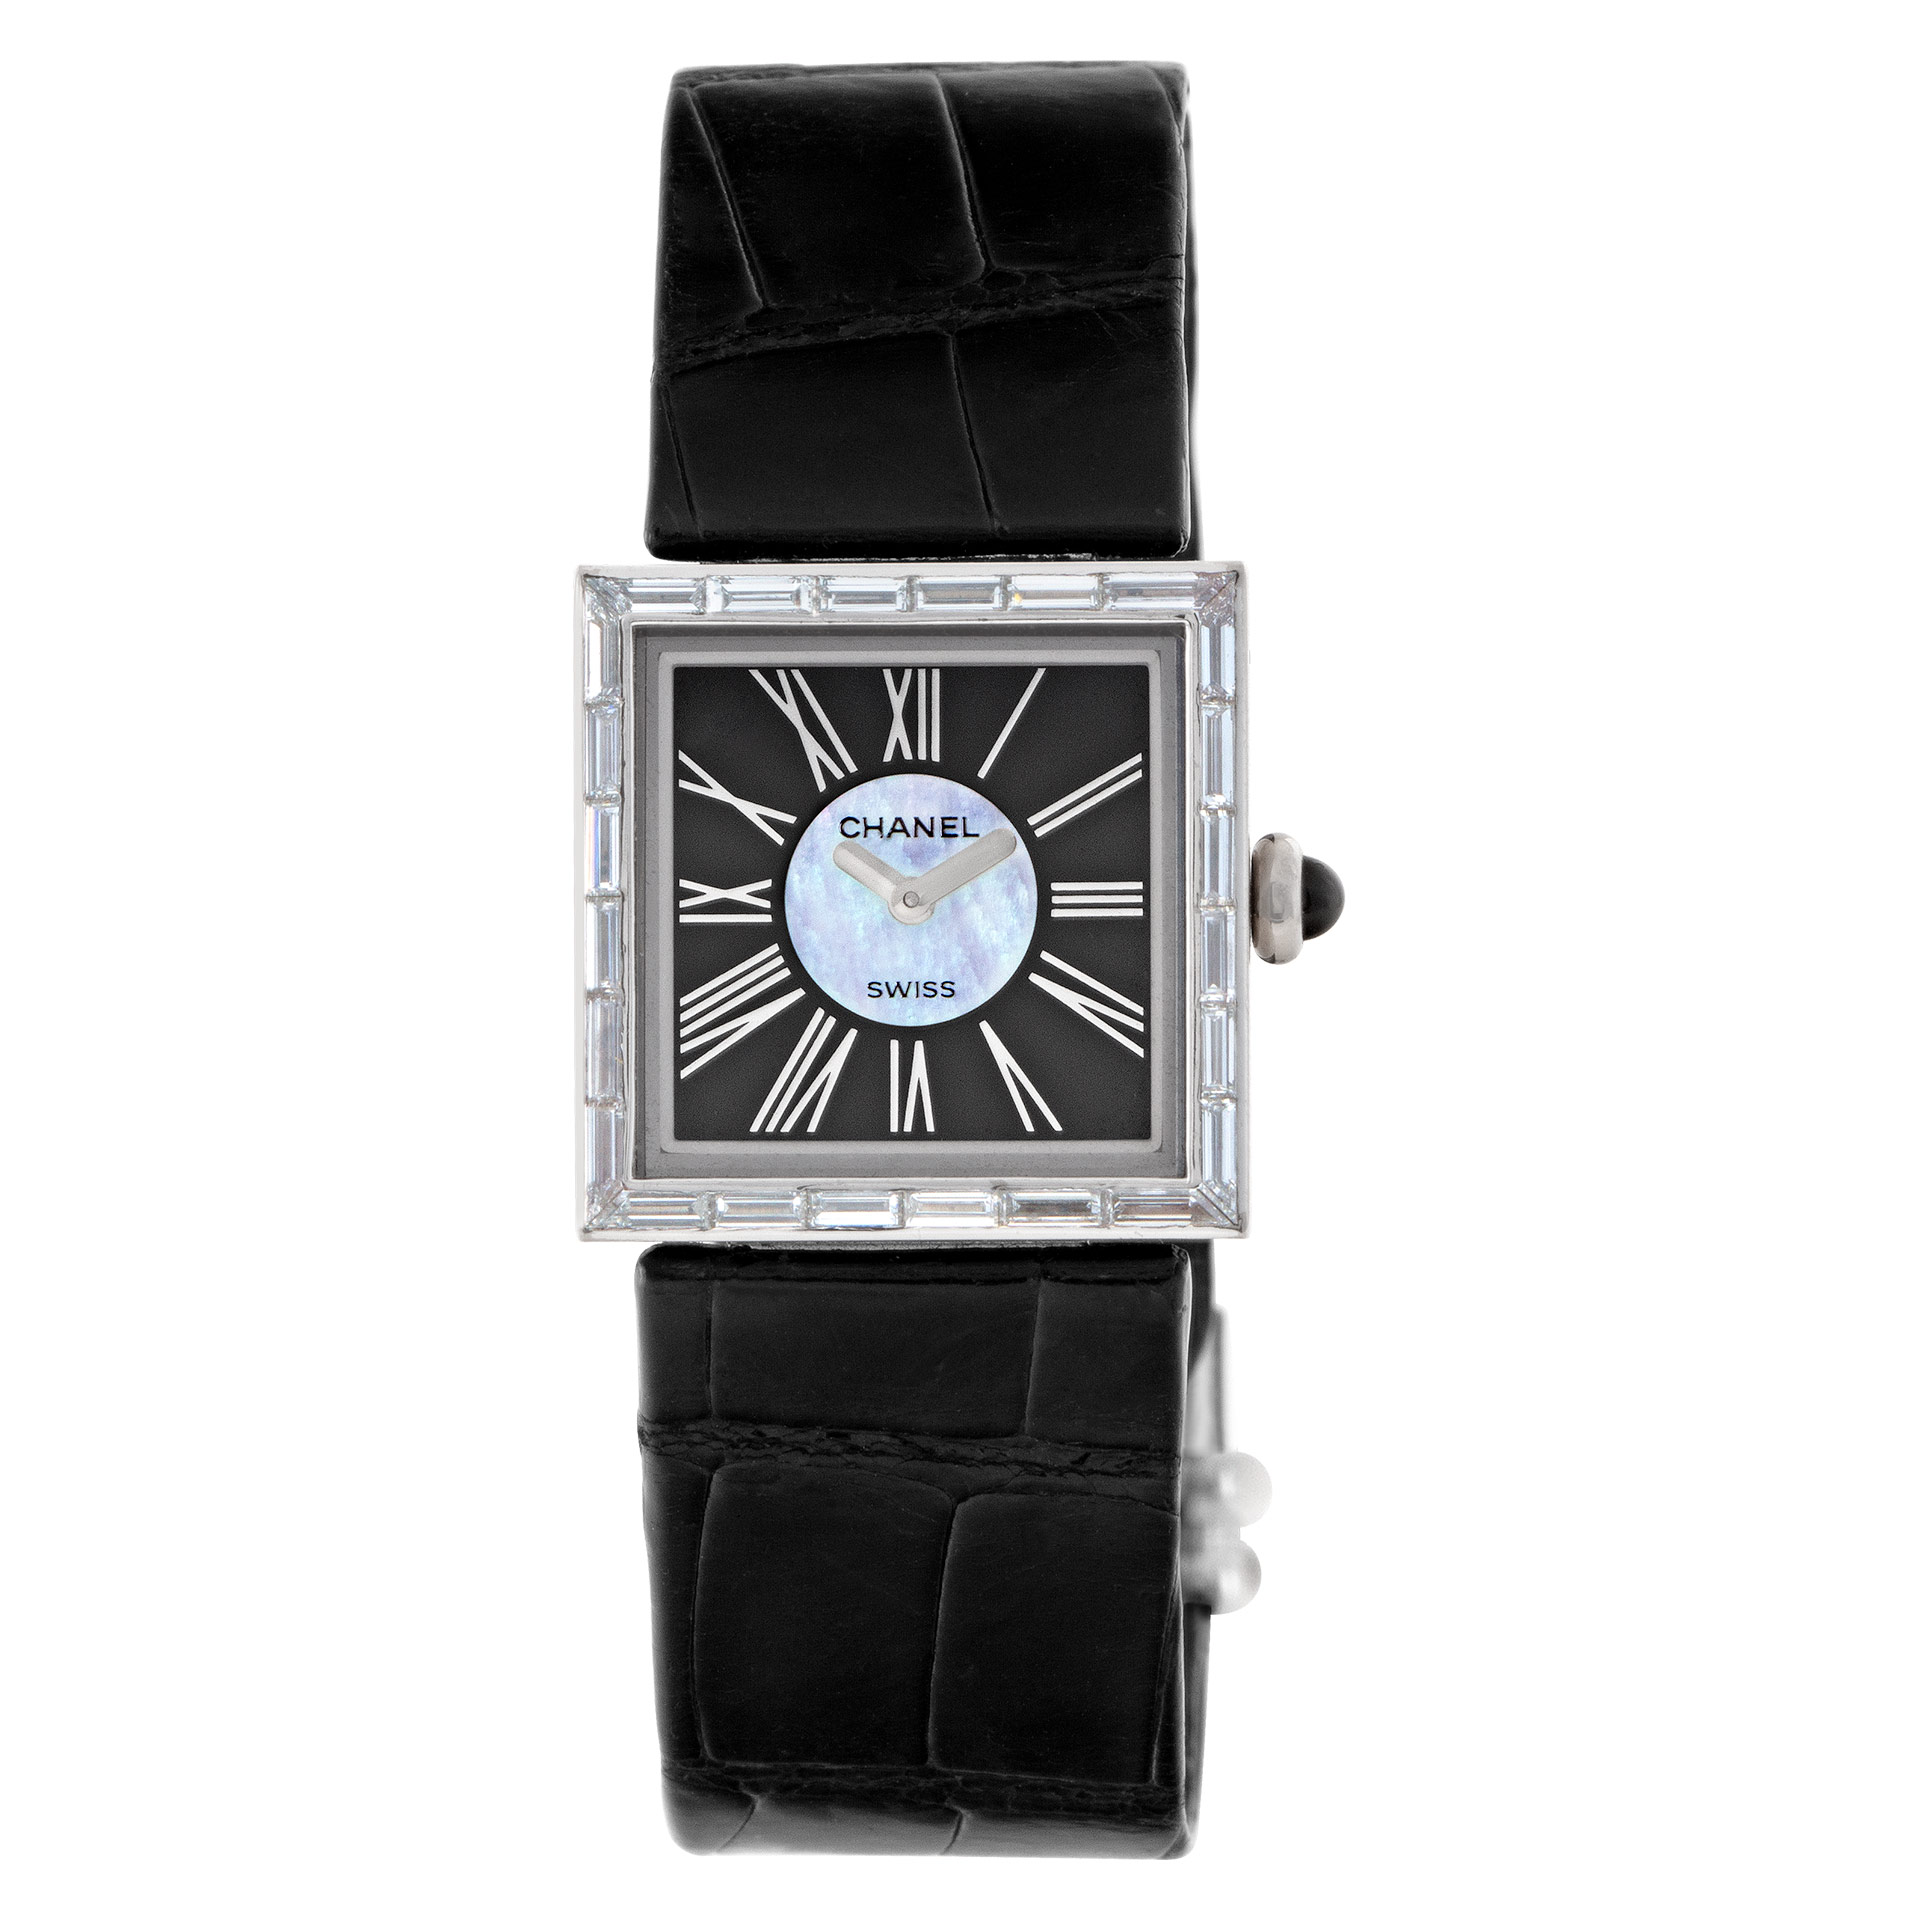 Used Fine Luxury Watches - Certified Pre-Owned